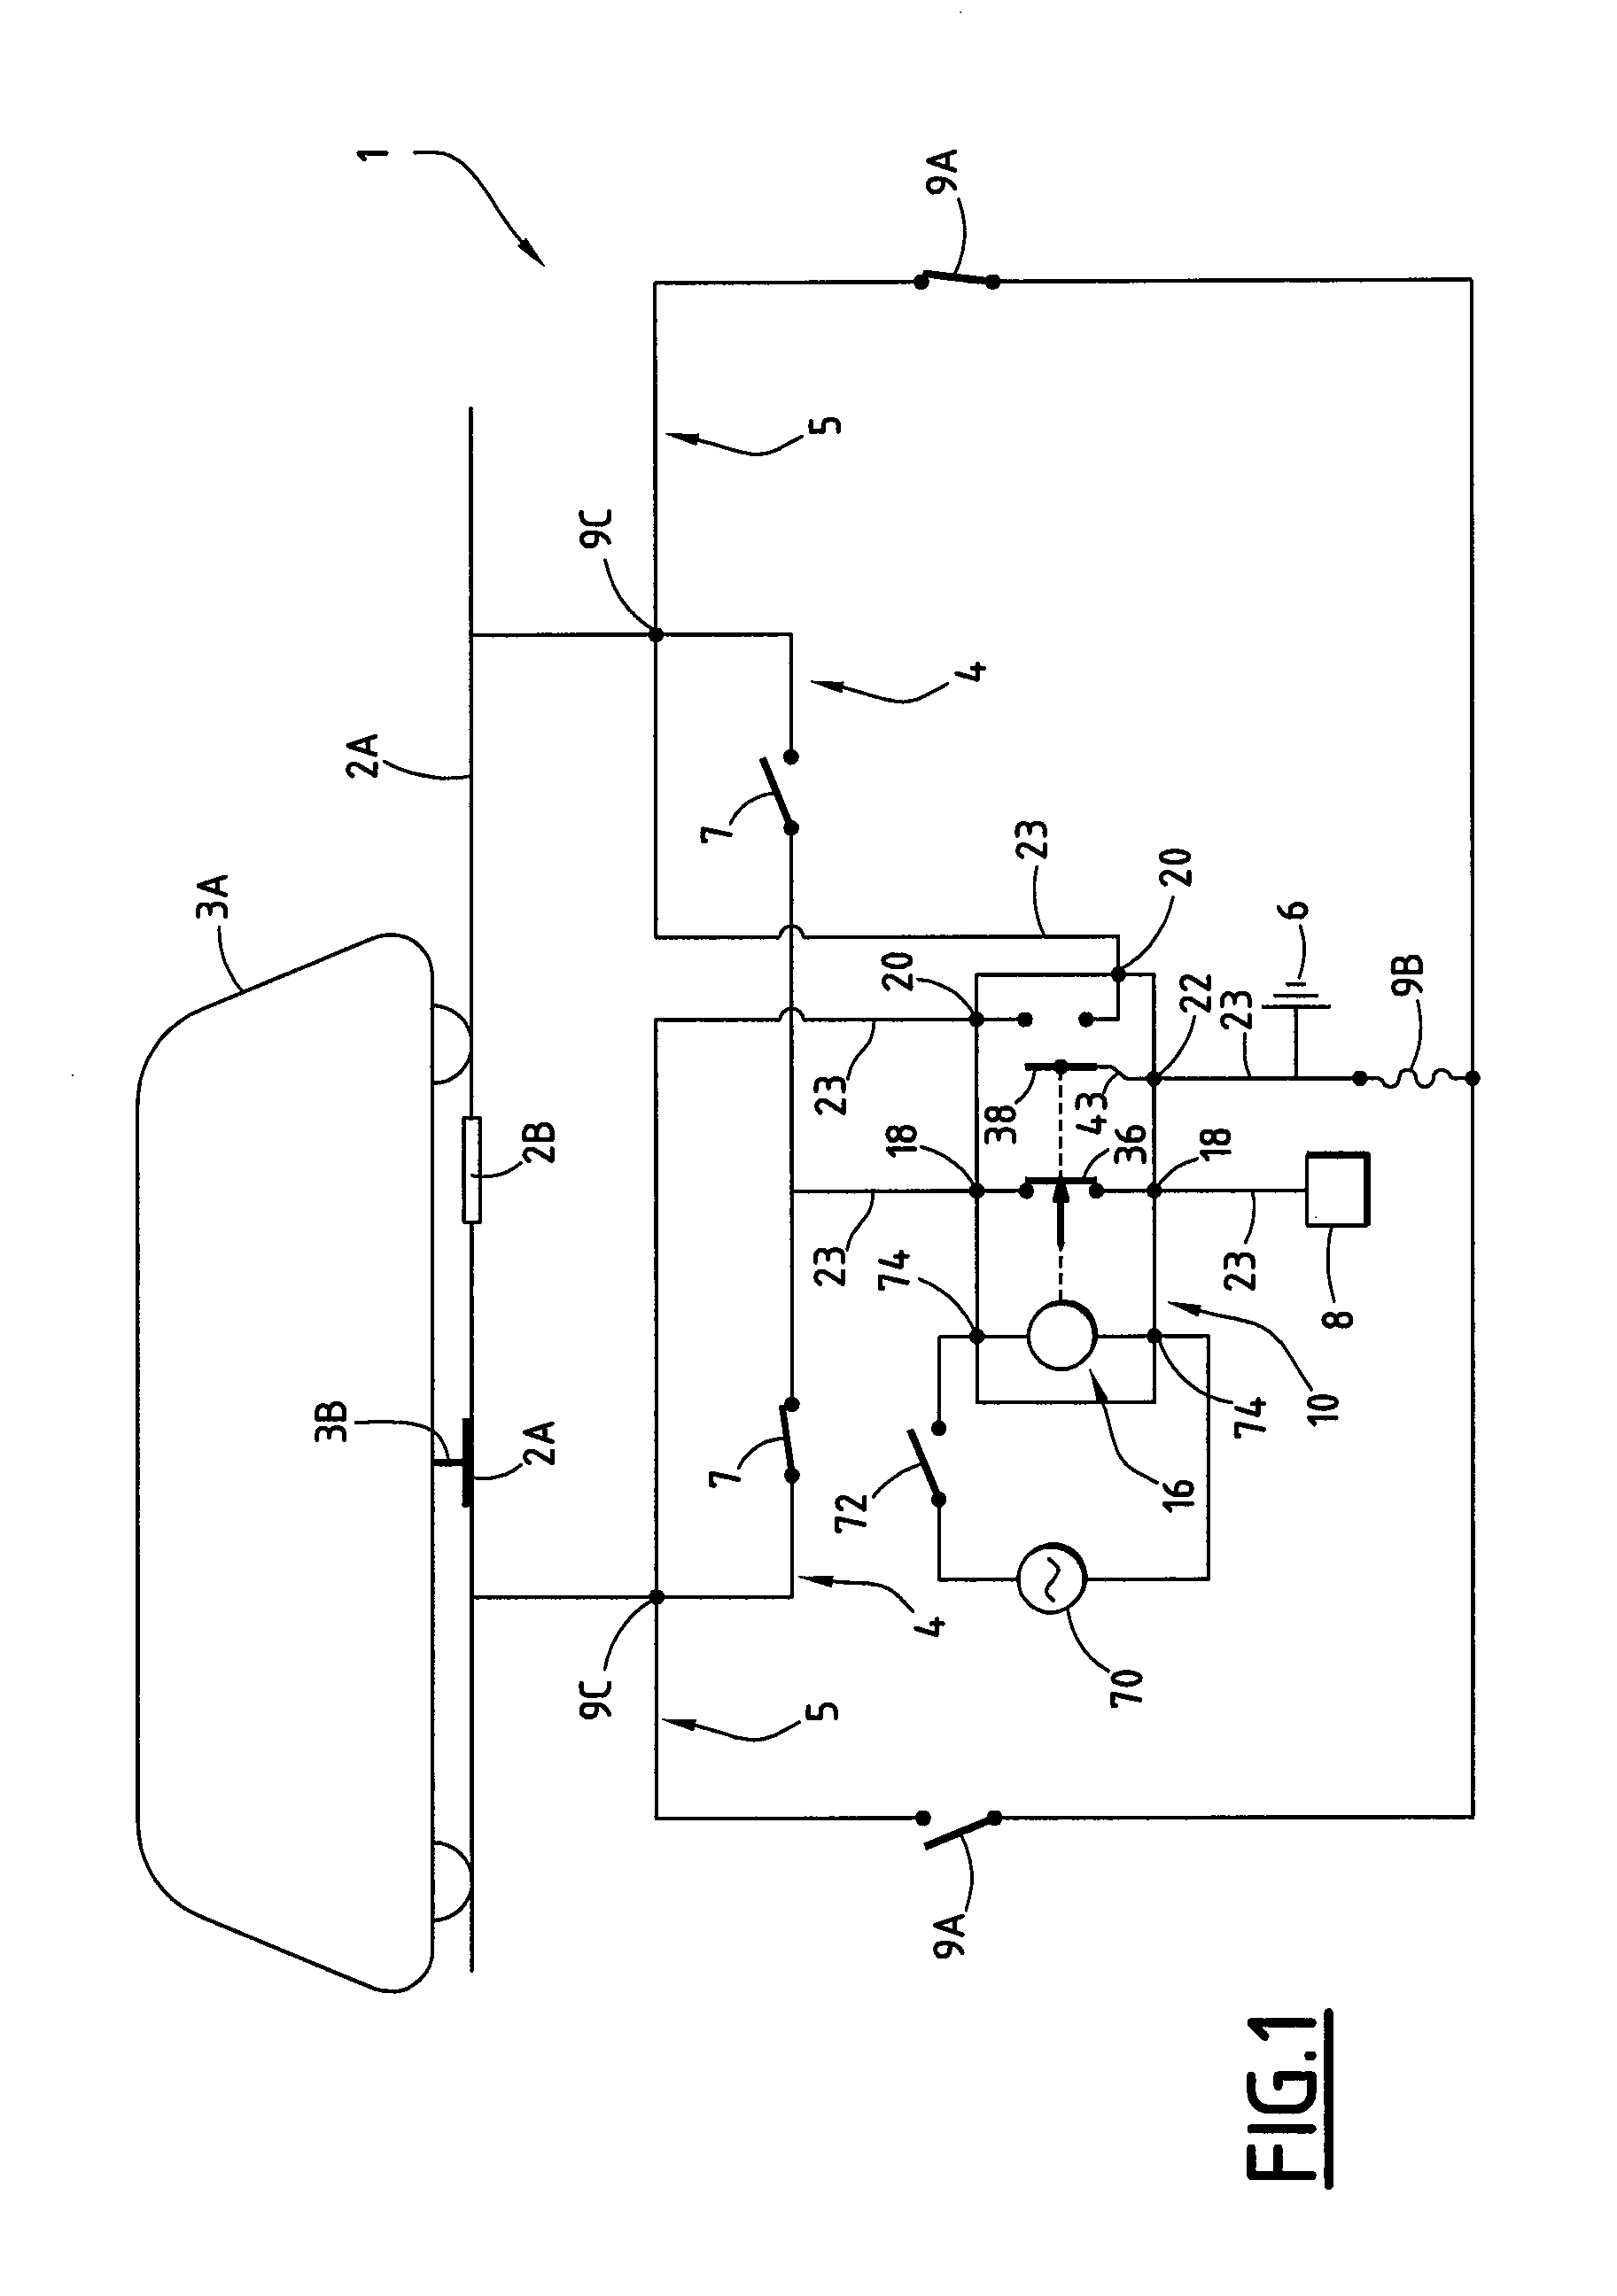 Device for sectioning an electrical circuit and a system for distributing electrical energy including the sectioning device